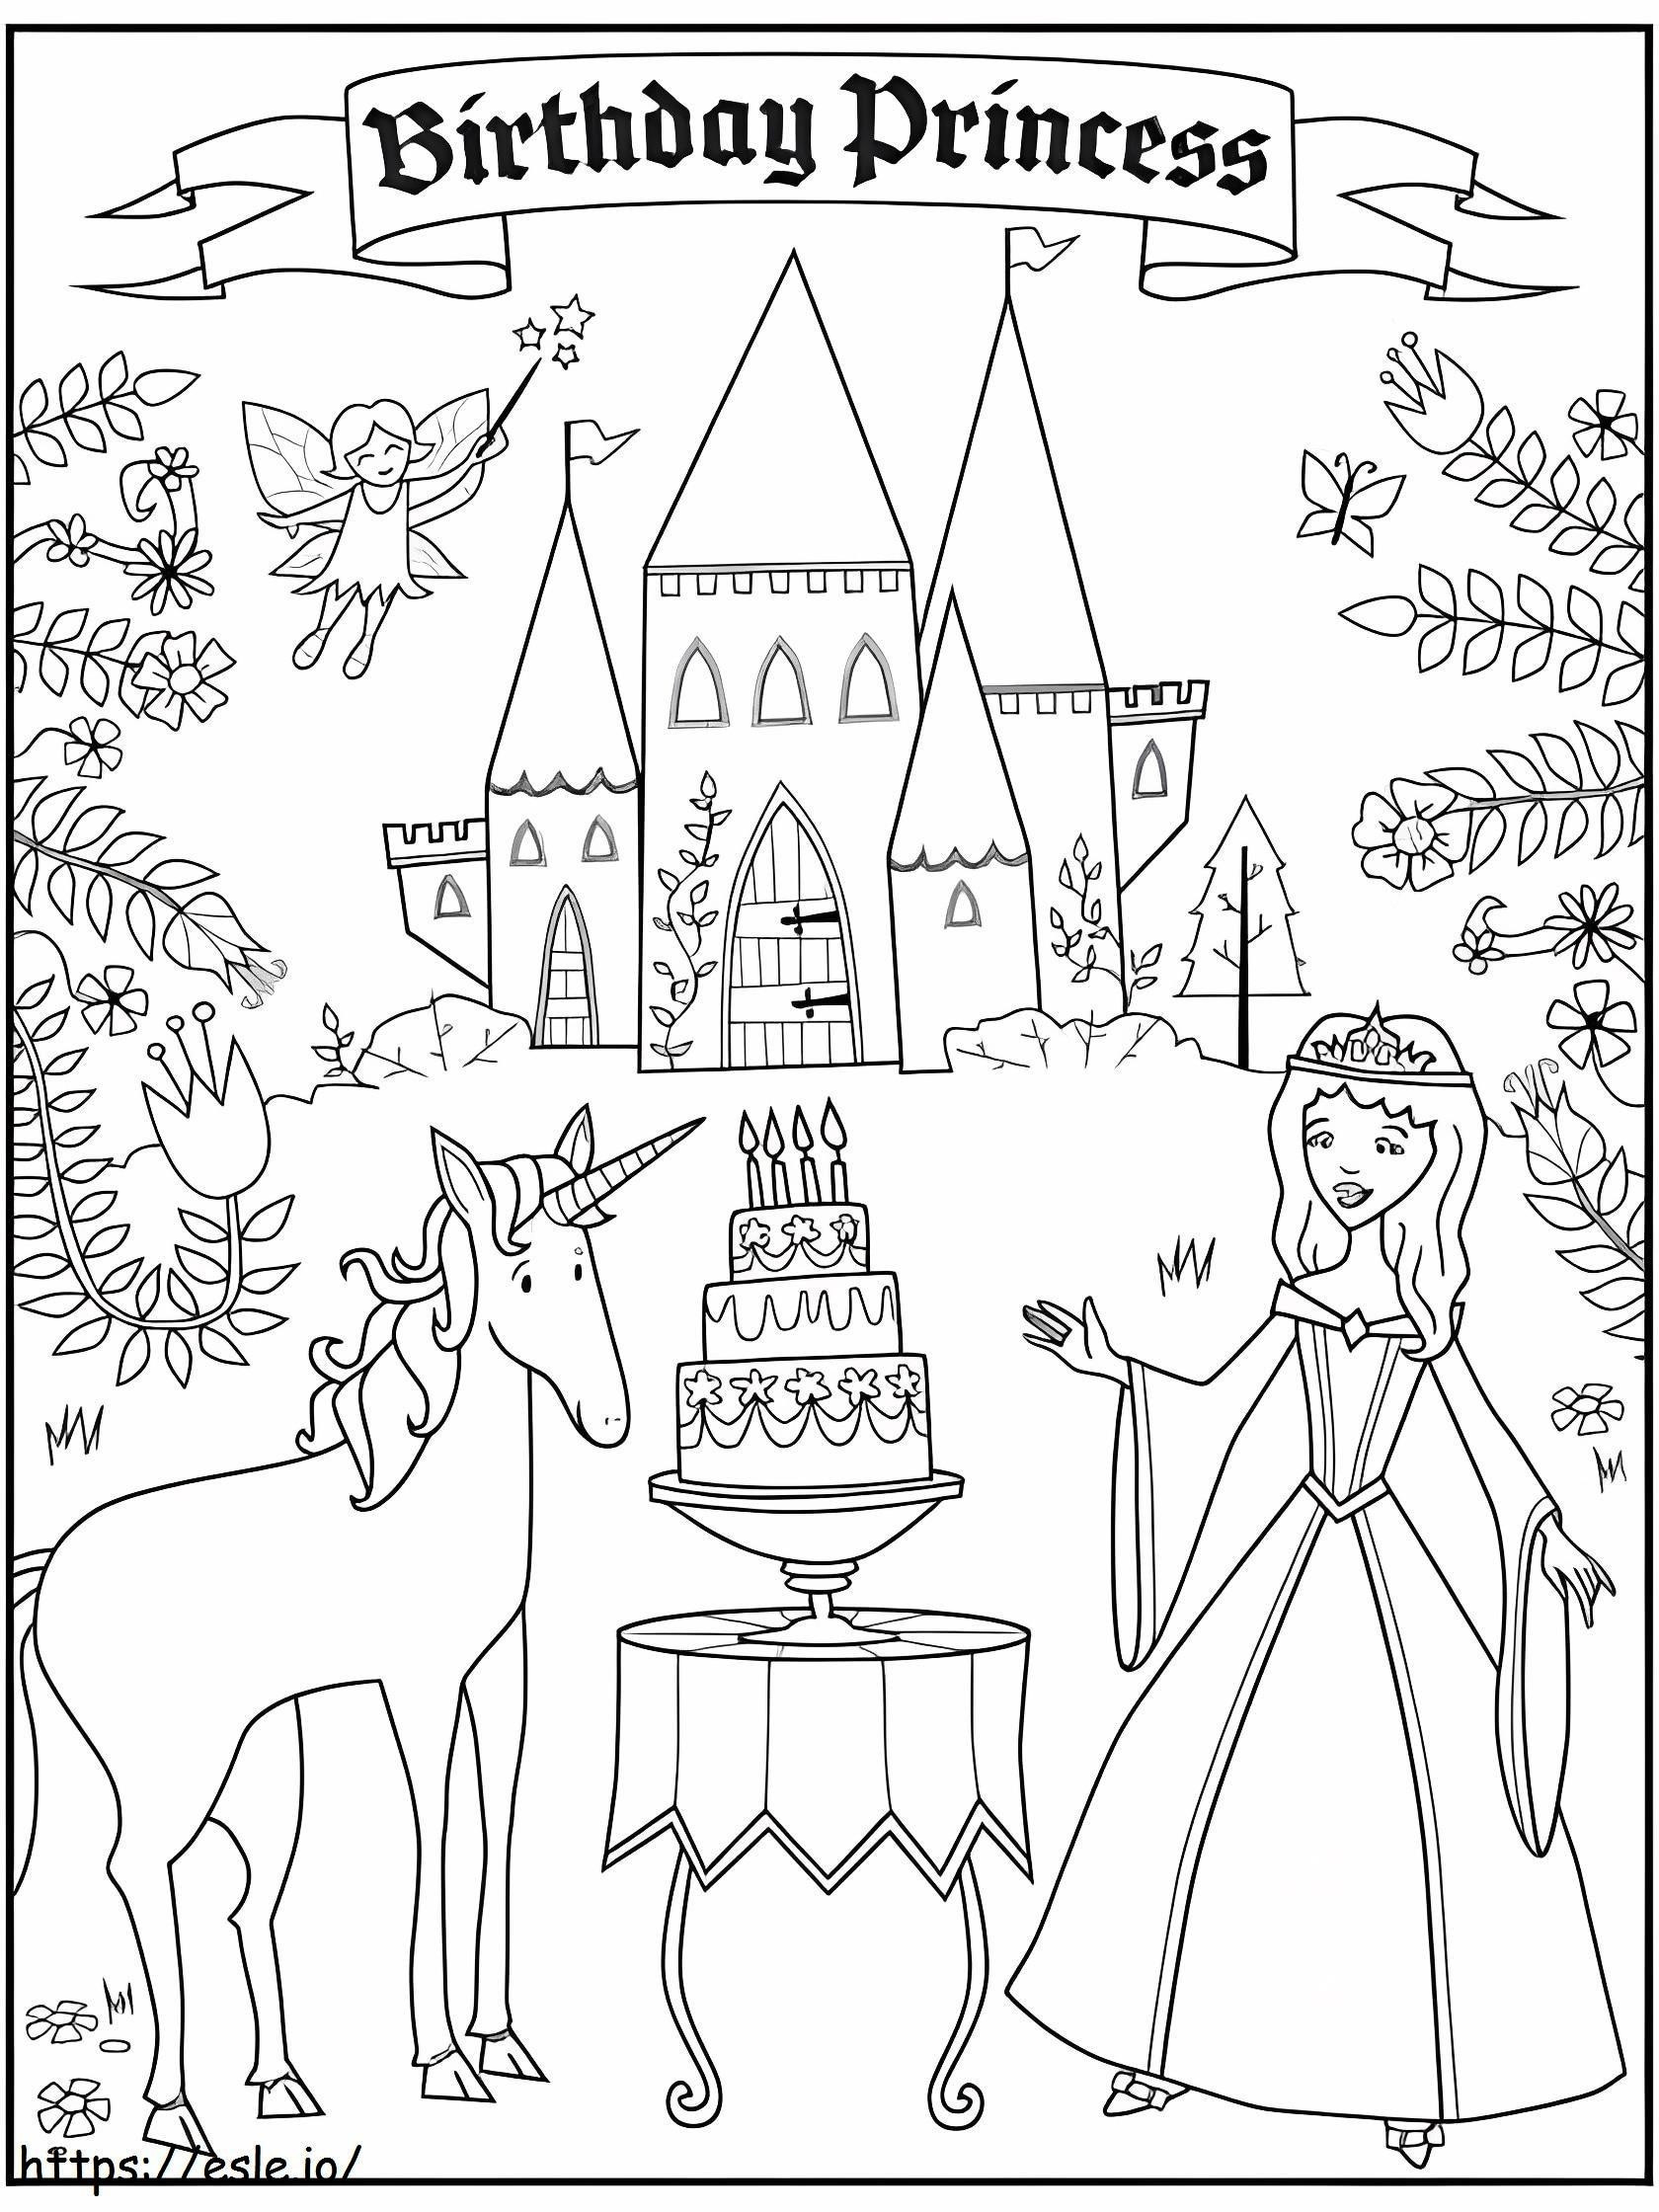 Birthday Princess In The Castle coloring page